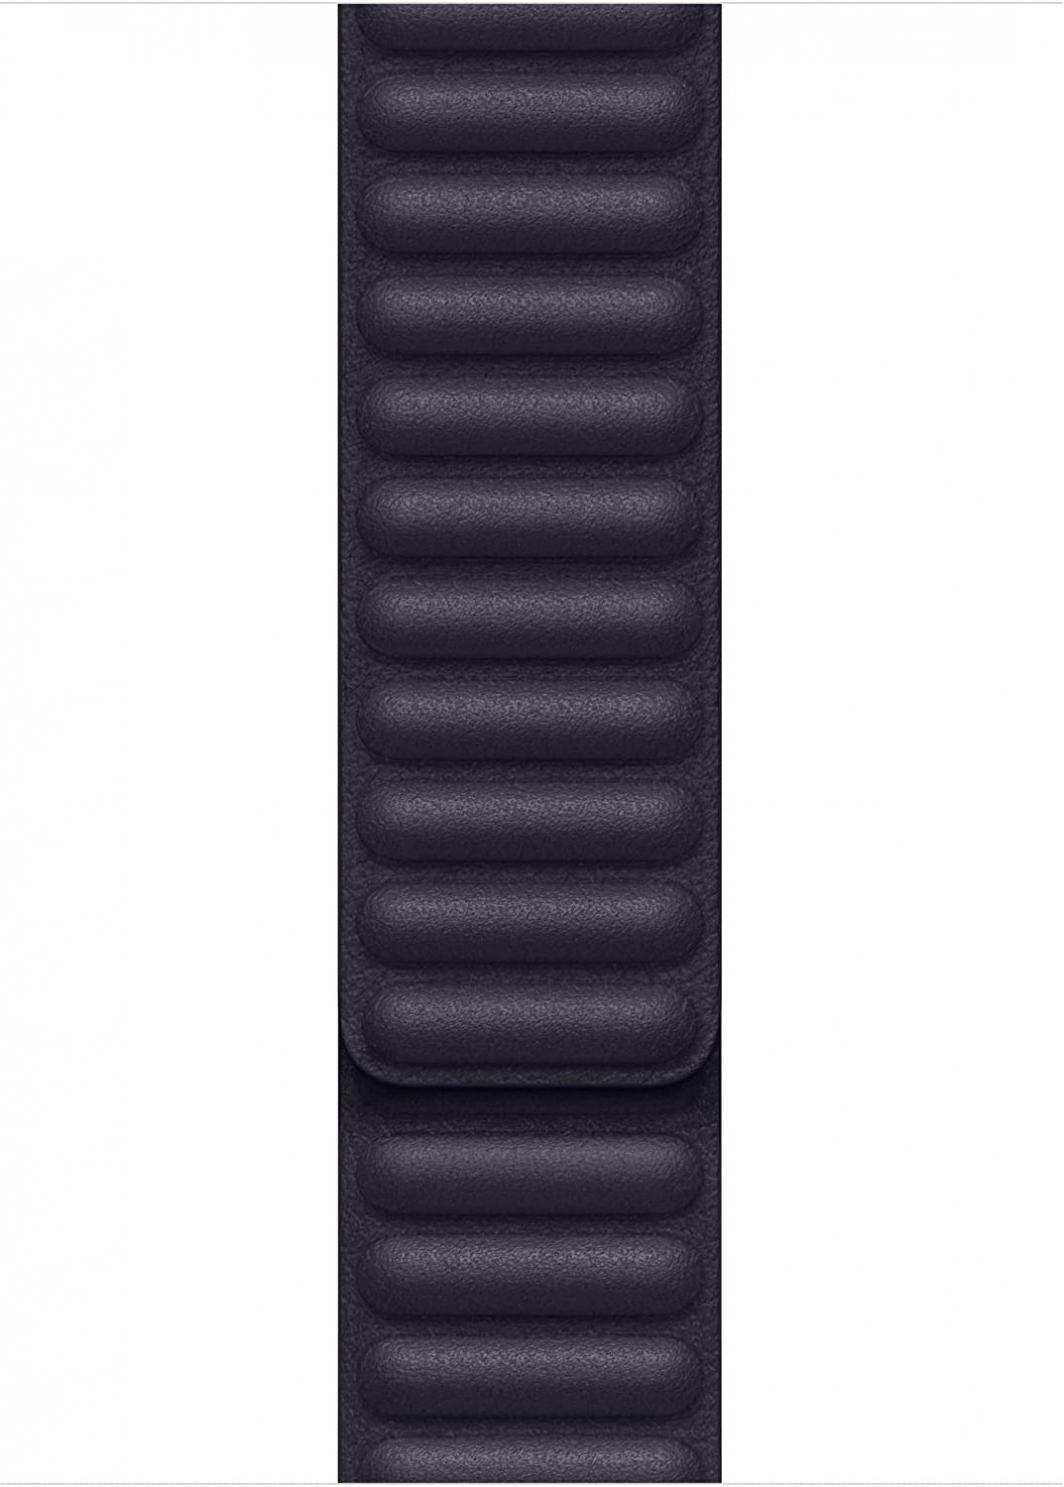 Apple Watch Band - Leather Link (45mm) - Ink - S/M